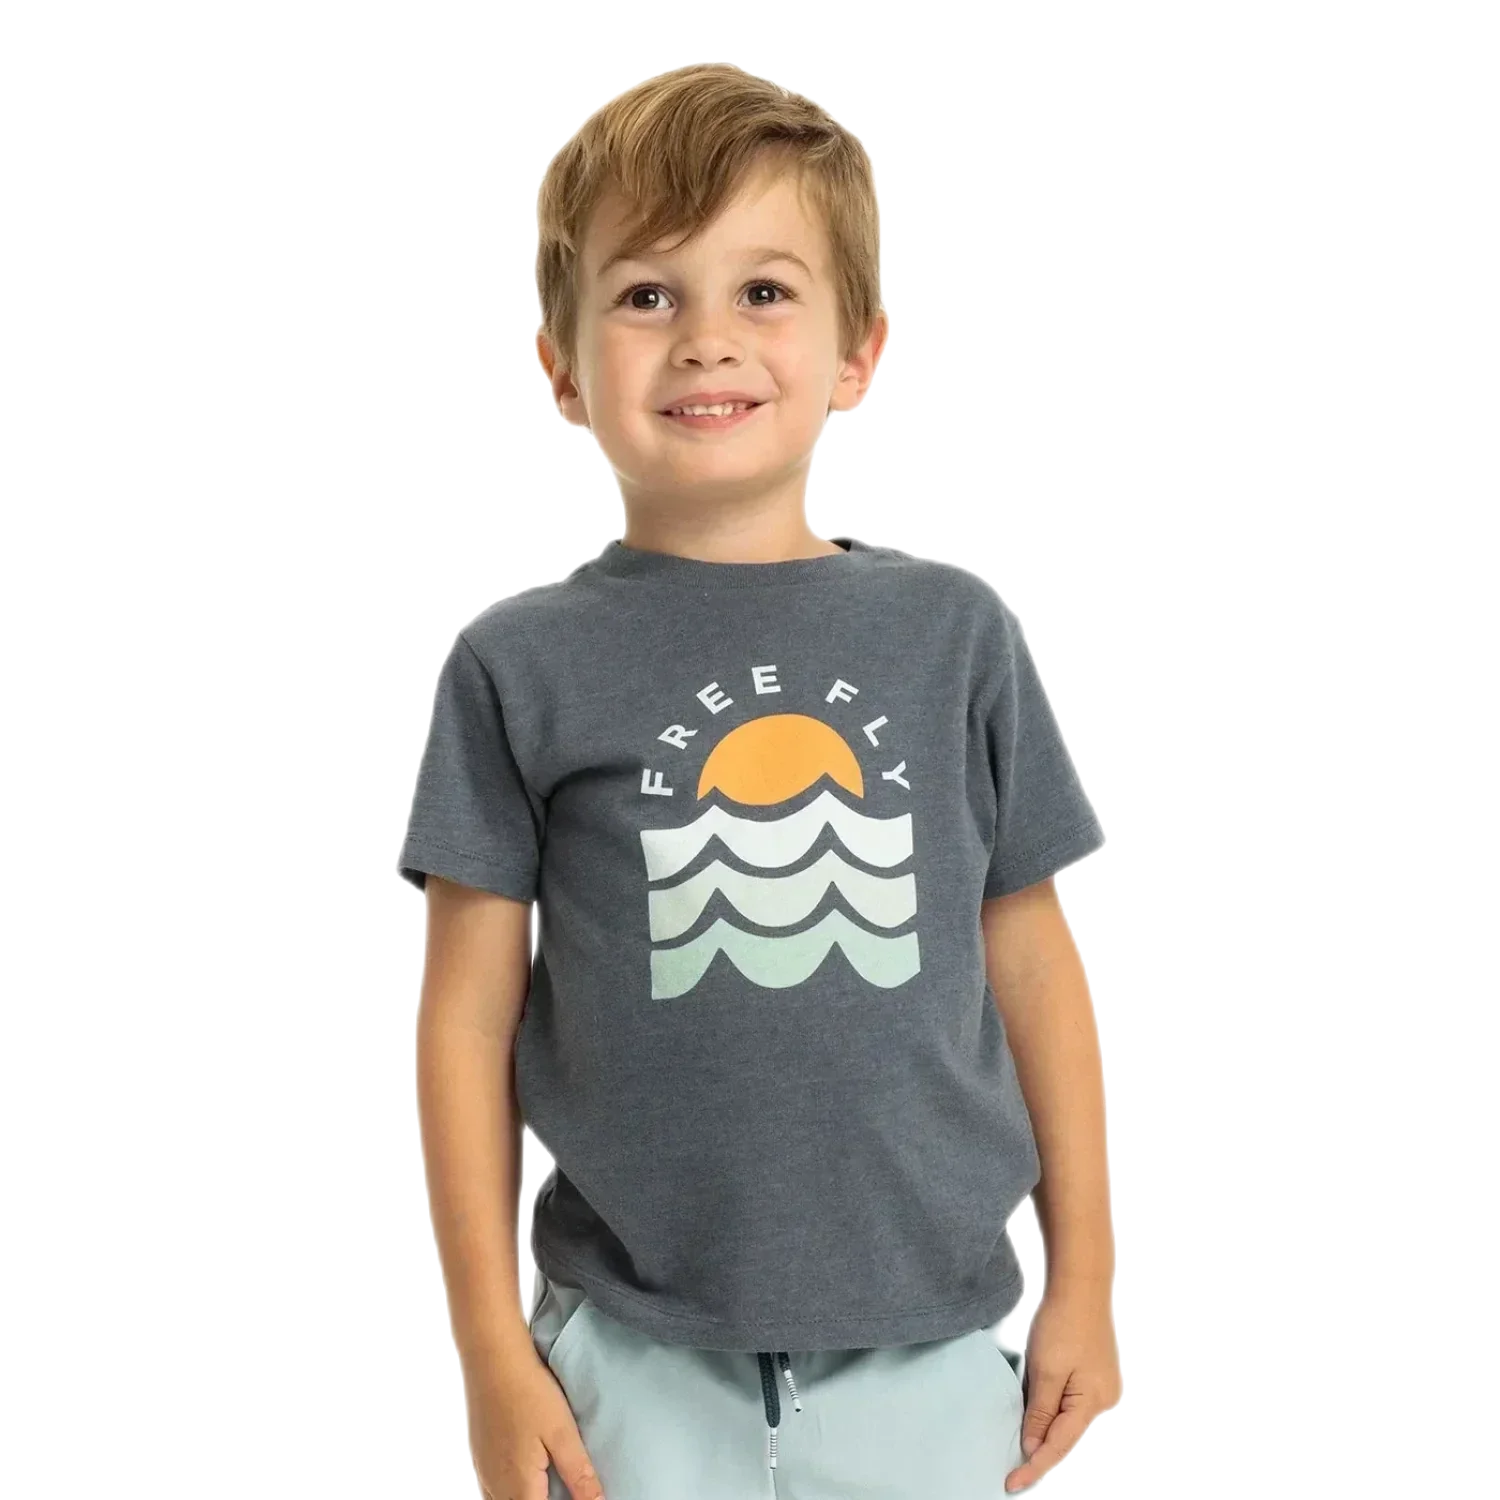 Free Fly Apparel KIDS|BABY - BABY - BABY TOPS Toddler Perfect Day Tee HEATHER STORM CLOUD